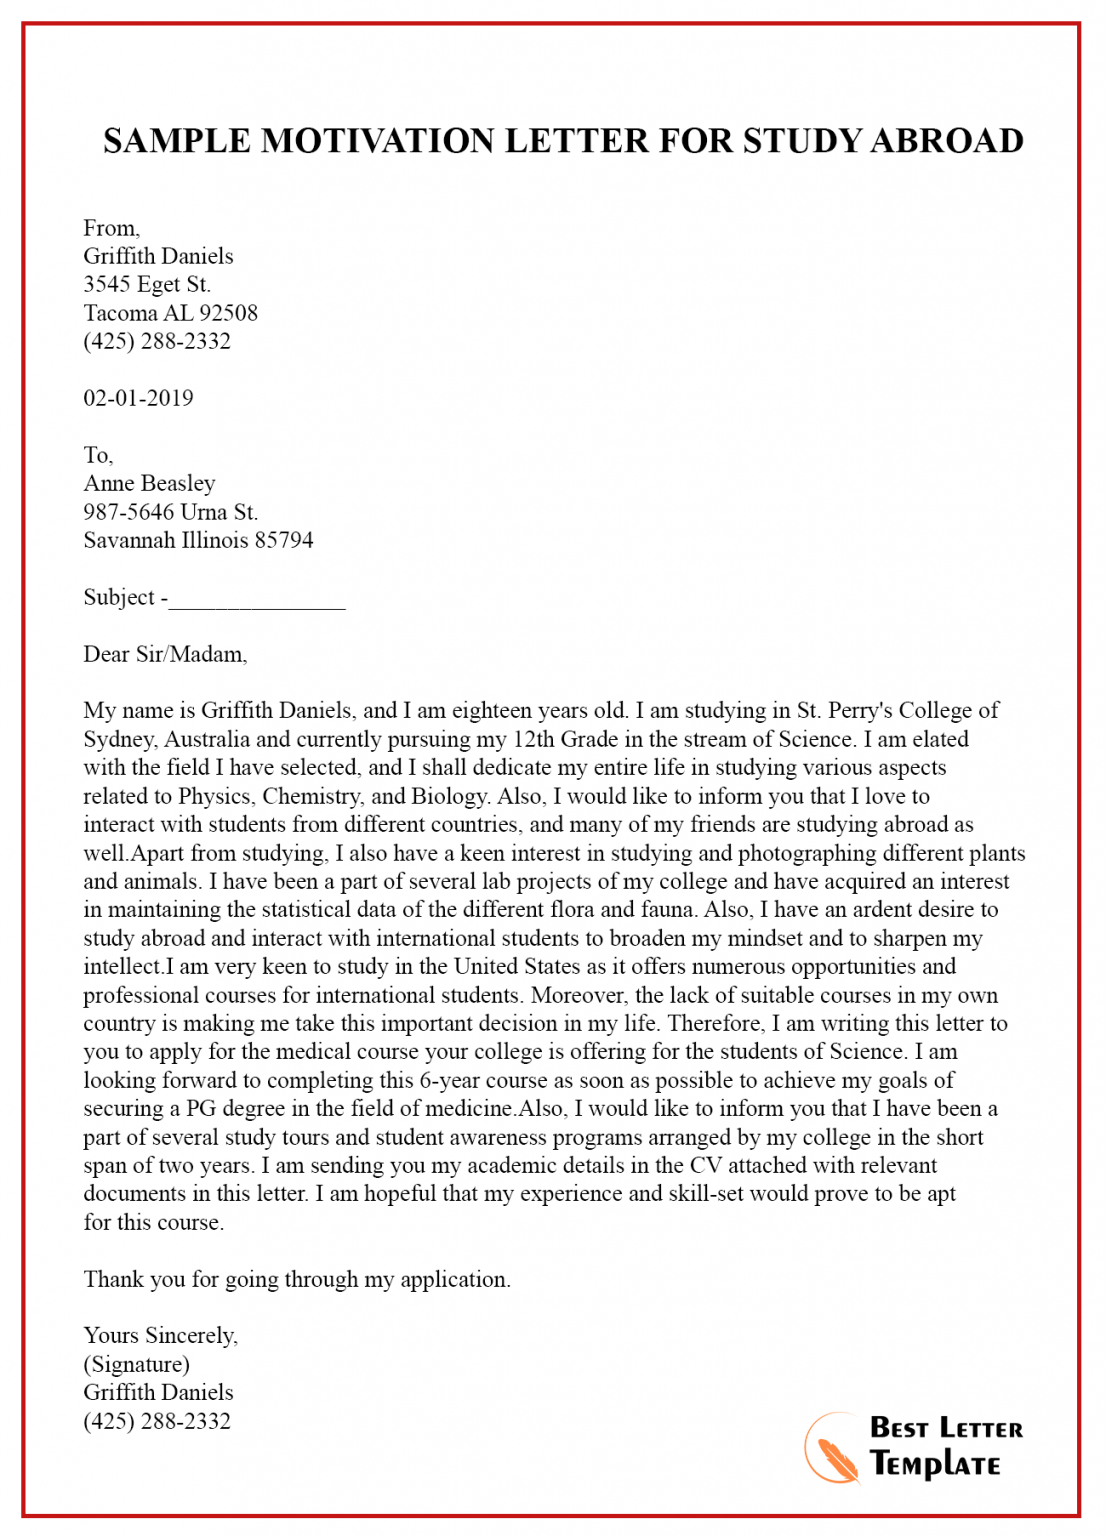 research stay motivation letter